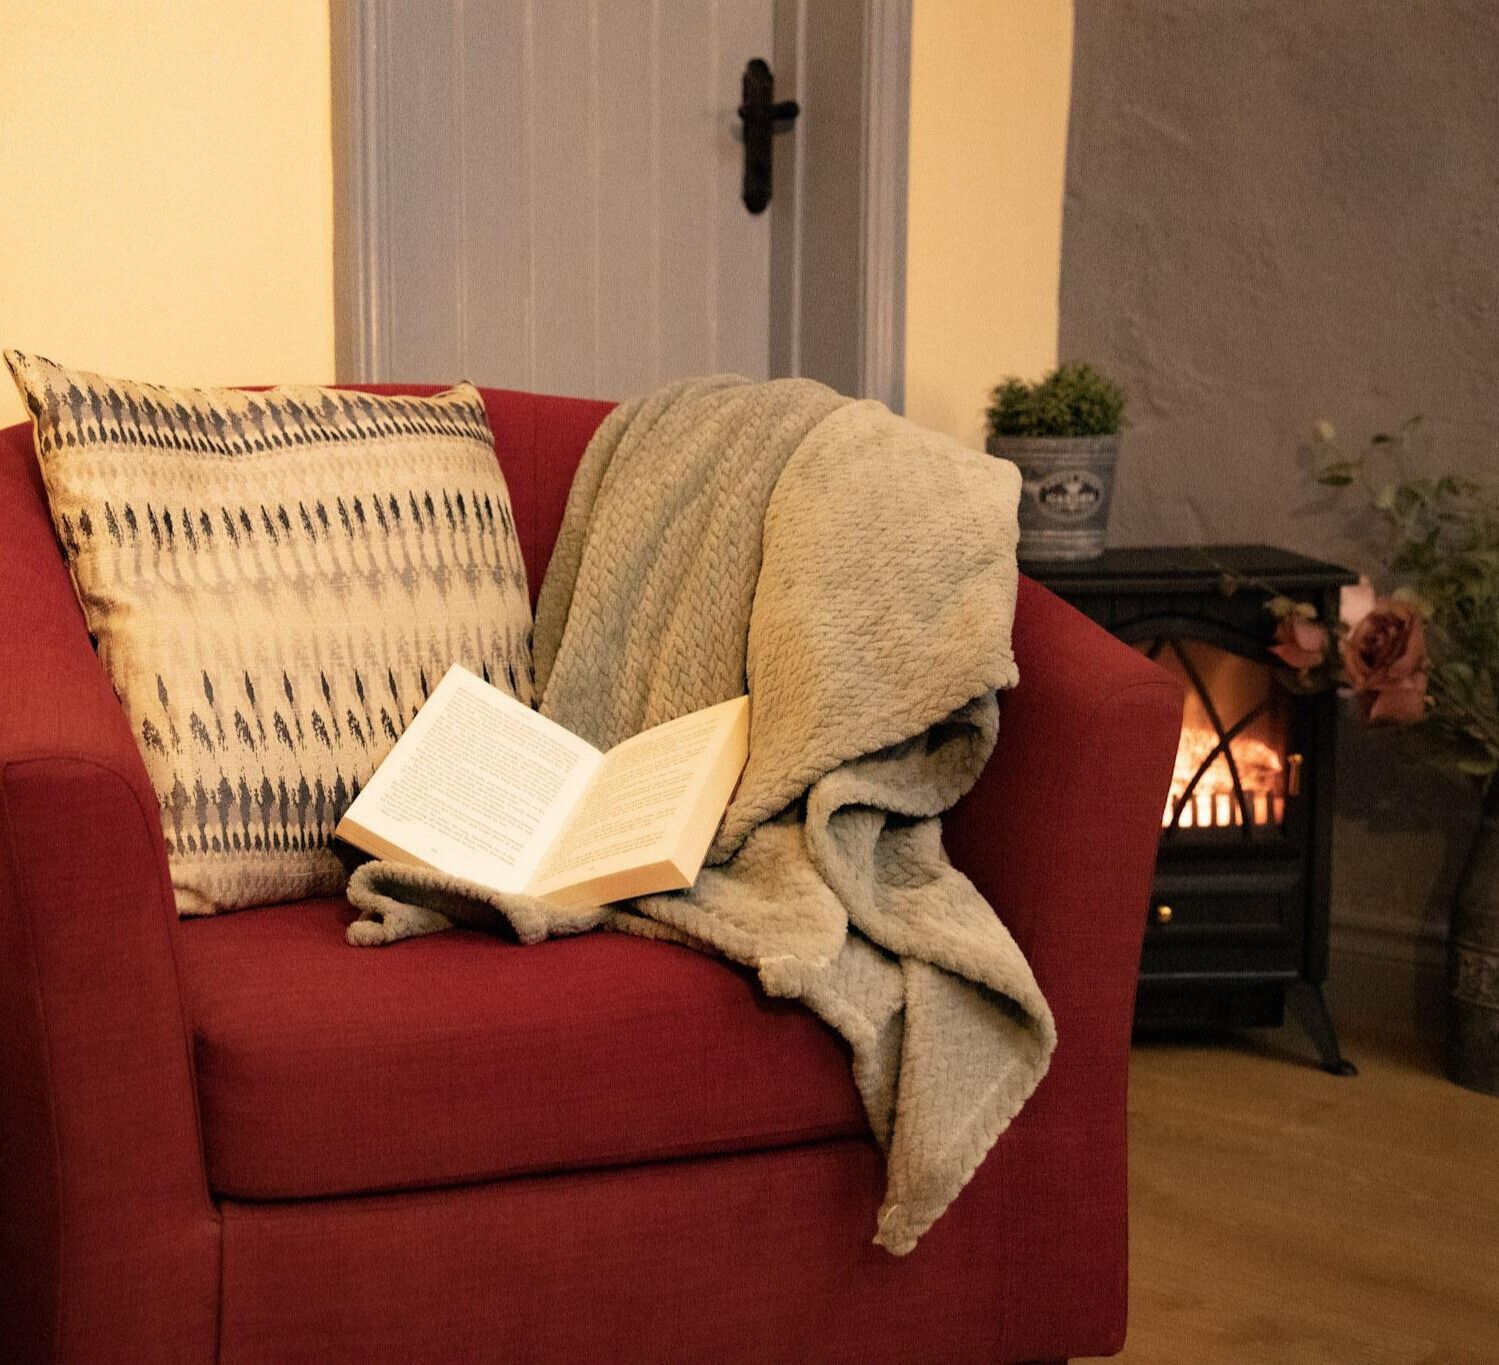 An open book on a red chair with a blanket draped over the arm and a lit fireplace in the background